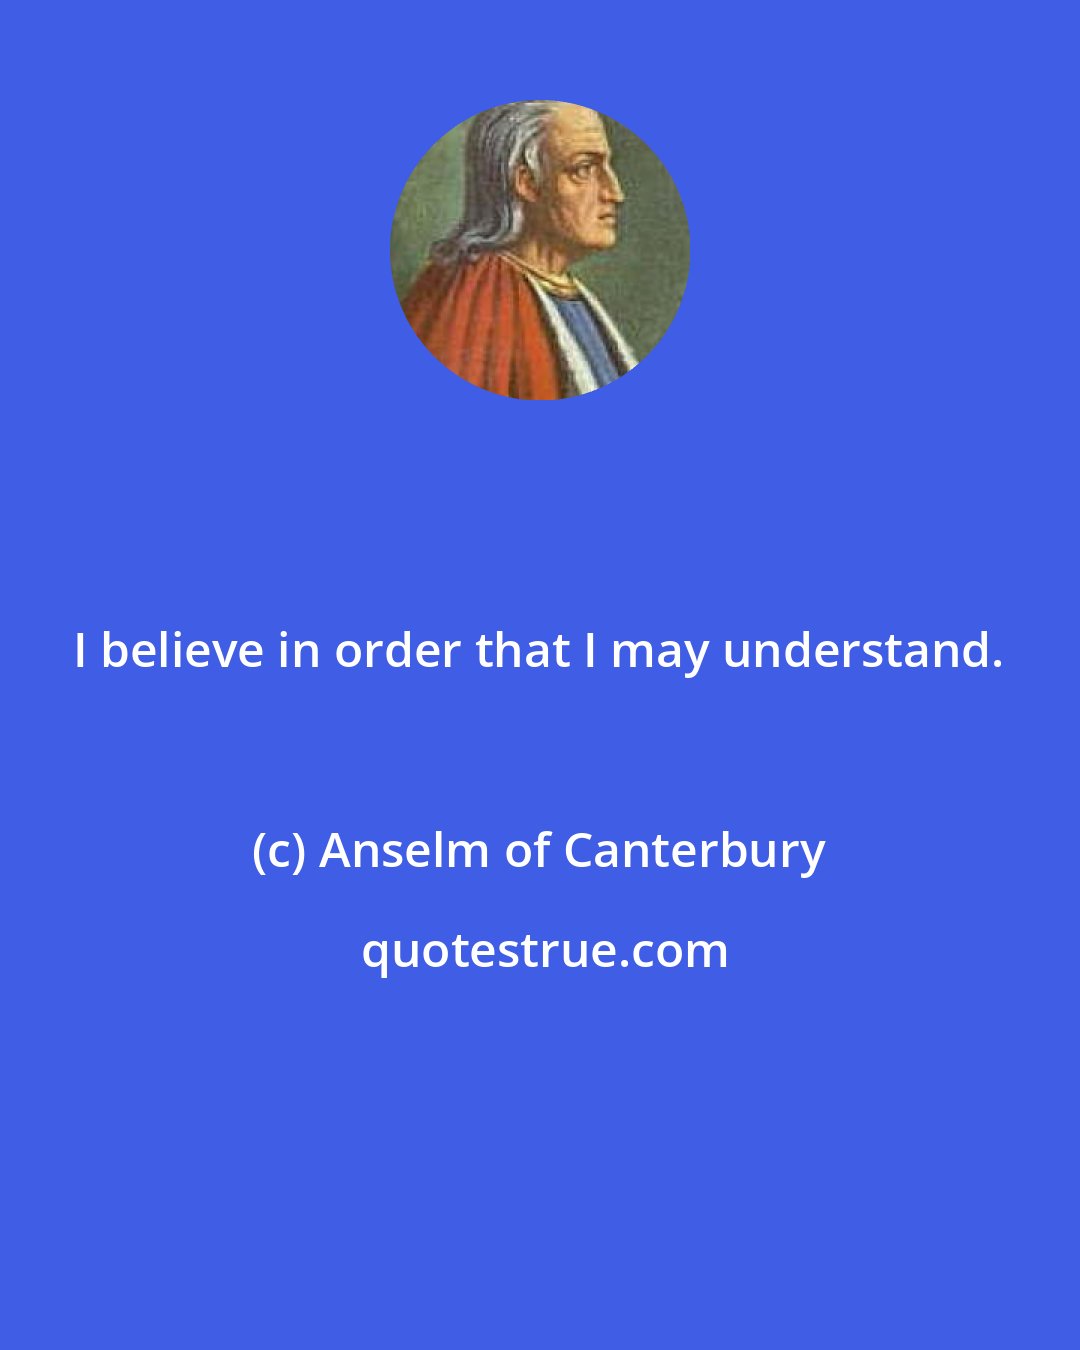 Anselm of Canterbury: I believe in order that I may understand.